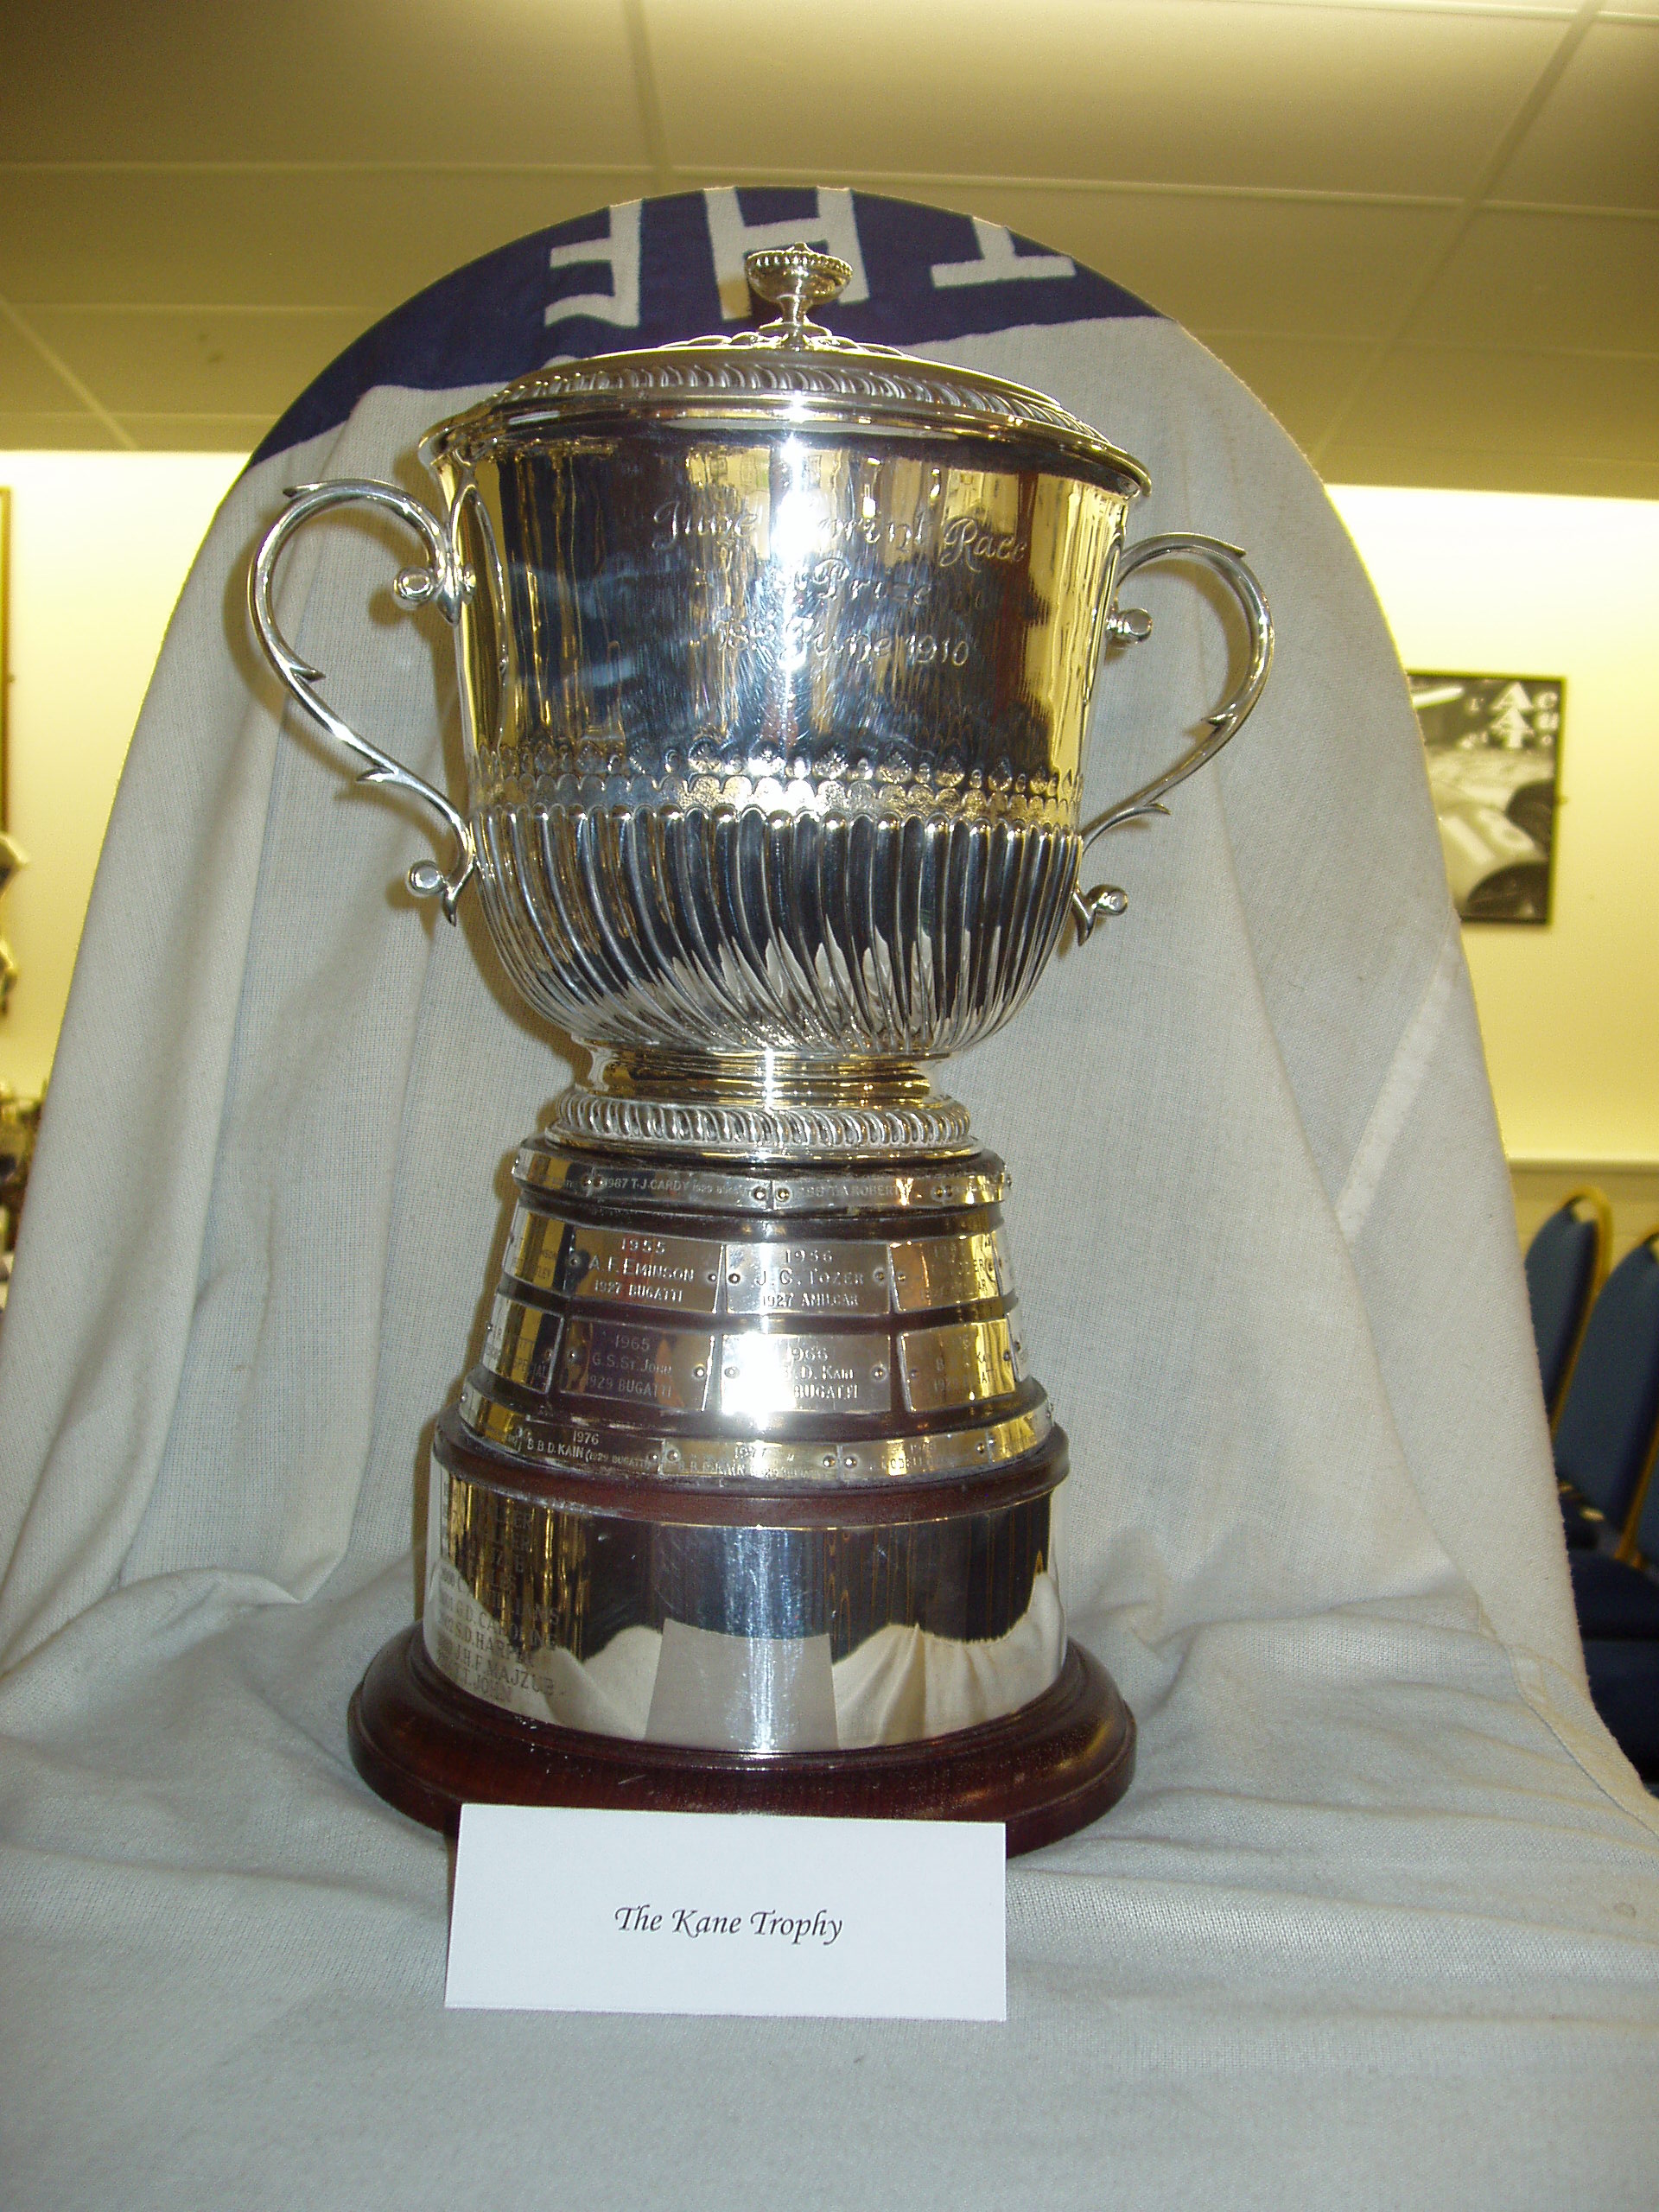 KANE TROPHY cover